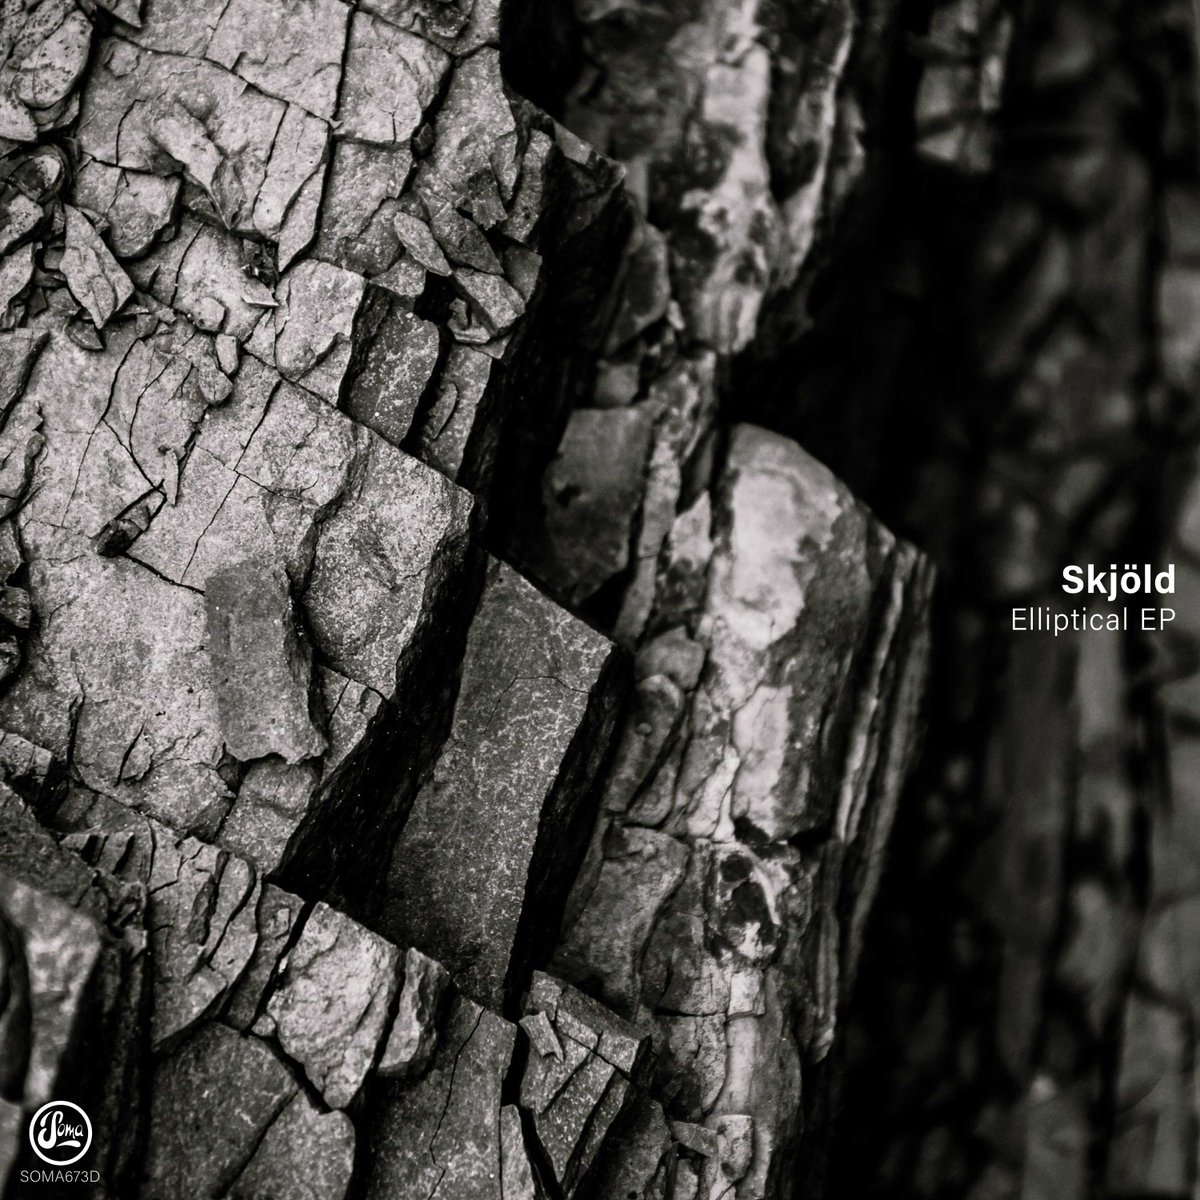 Our next release sees another special label debut this time from the talented producer Skjöld who drops 4 uniquely deep and minimalistic tracks with the Elliptical EP 🔊 Release date: May 31st Pre-order: t.ly/sbFVs